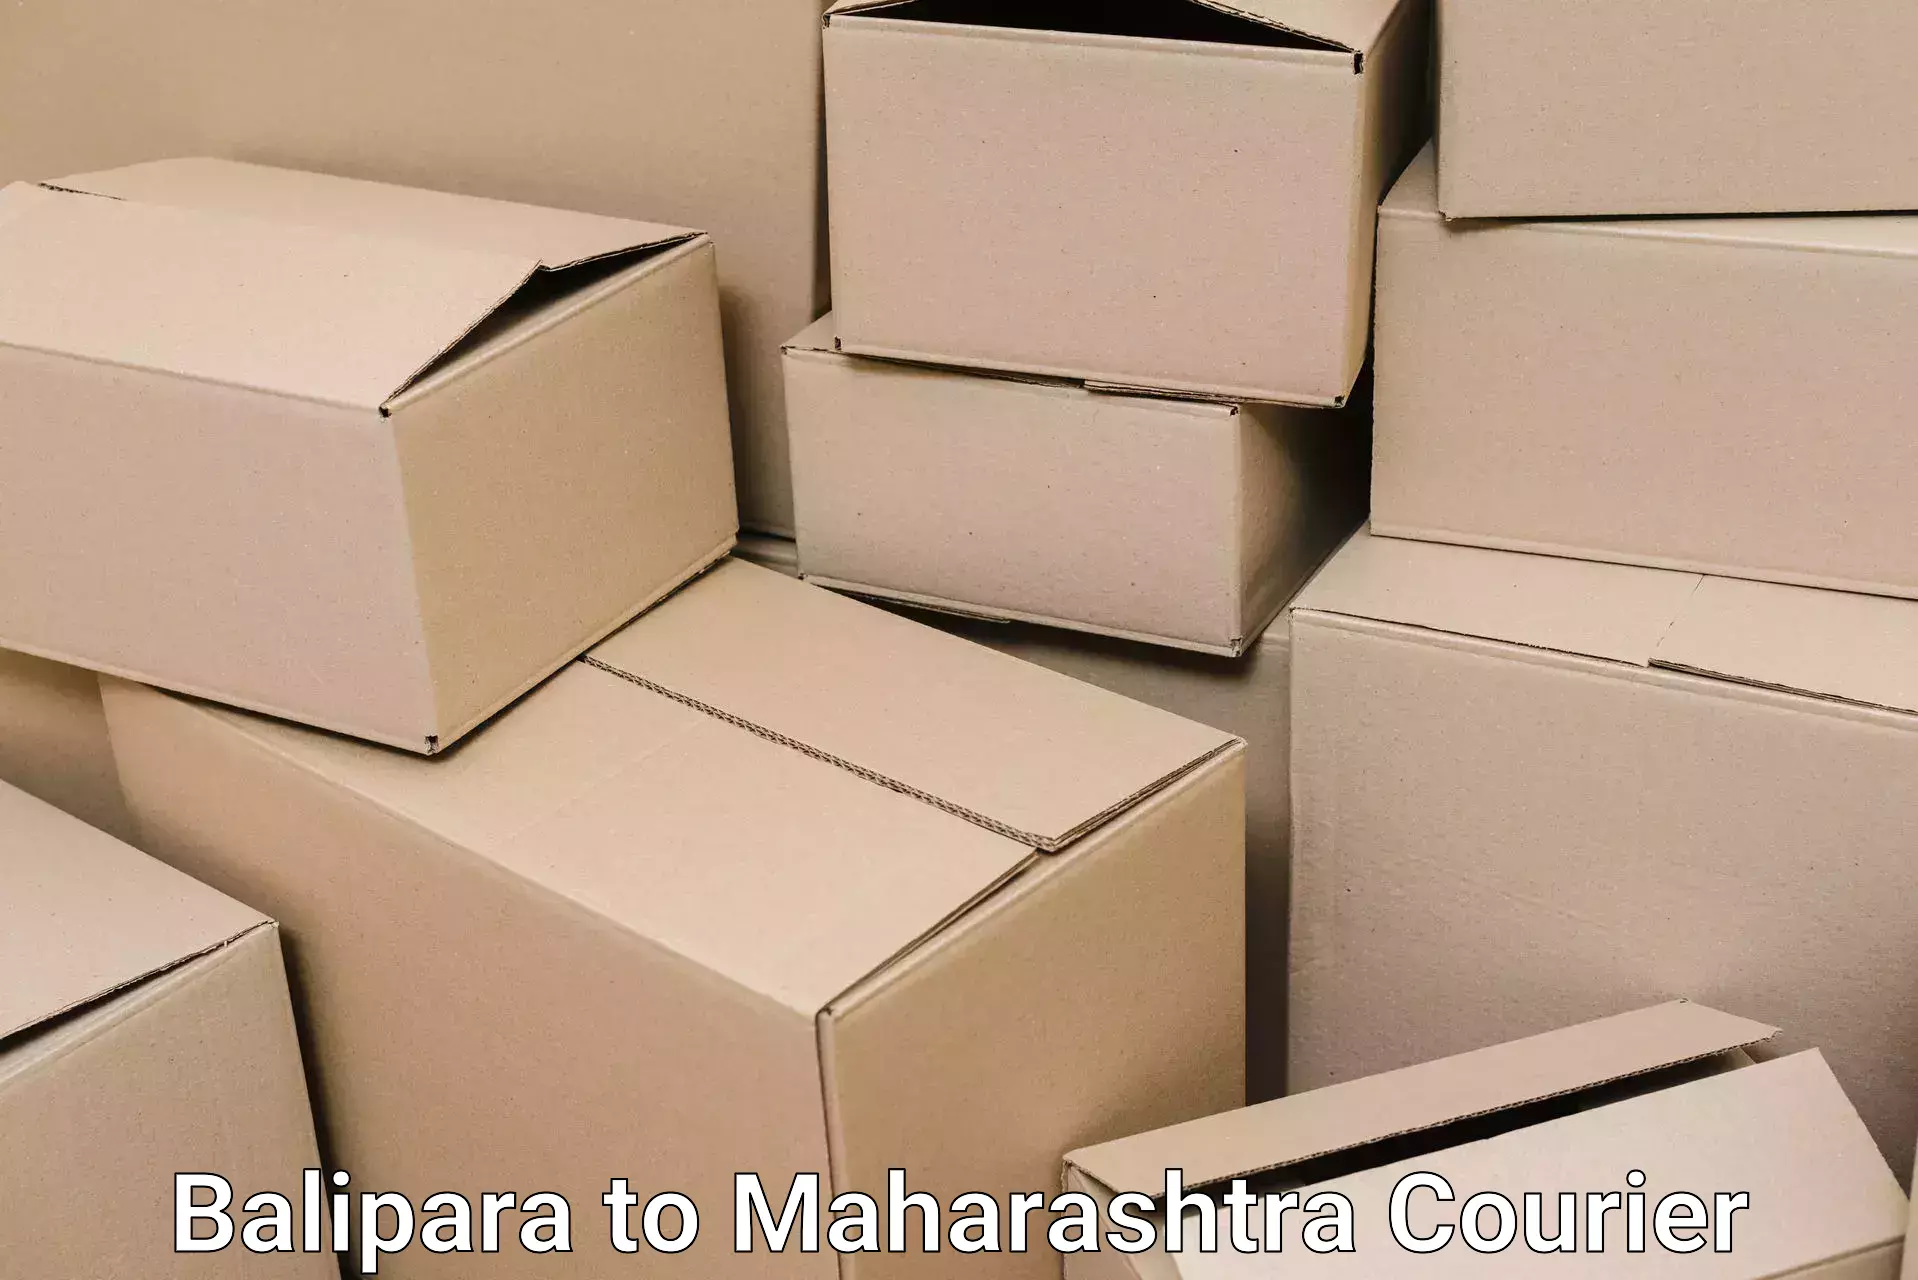 Furniture transport specialists in Balipara to Lonavala